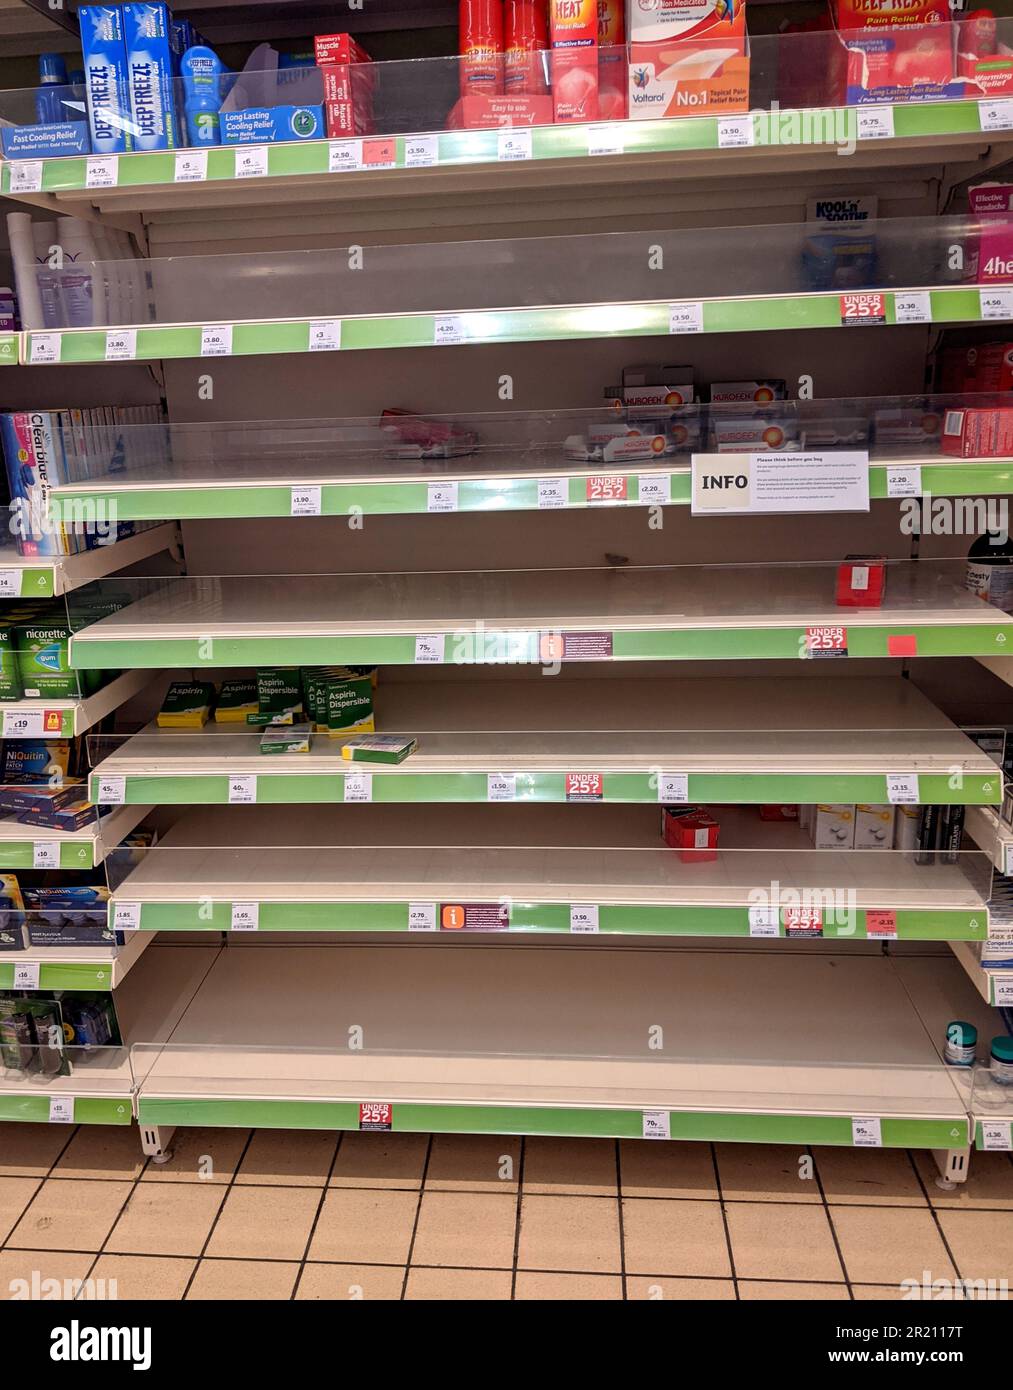 Shelves emptied of paracetamol and ibuprofen at a supermarket.    Panic buying has emptied essential supplies of various products from the shelves of supermarkets as the spread of the COVID-19 coronavirus continues and members of the public buy up stock of toilet paper, soap and basic food stuffs [Thursday 12/03/2020 - Sainsbury, Hornchurch, Essex].    2019-nCoV or COVID-19, informally known as the Wuhan coronavirus, is a contagious virus that causes respiratory infection. It is the cause of the 2019–20 Wuhan coronavirus outbreak. Stock Photo